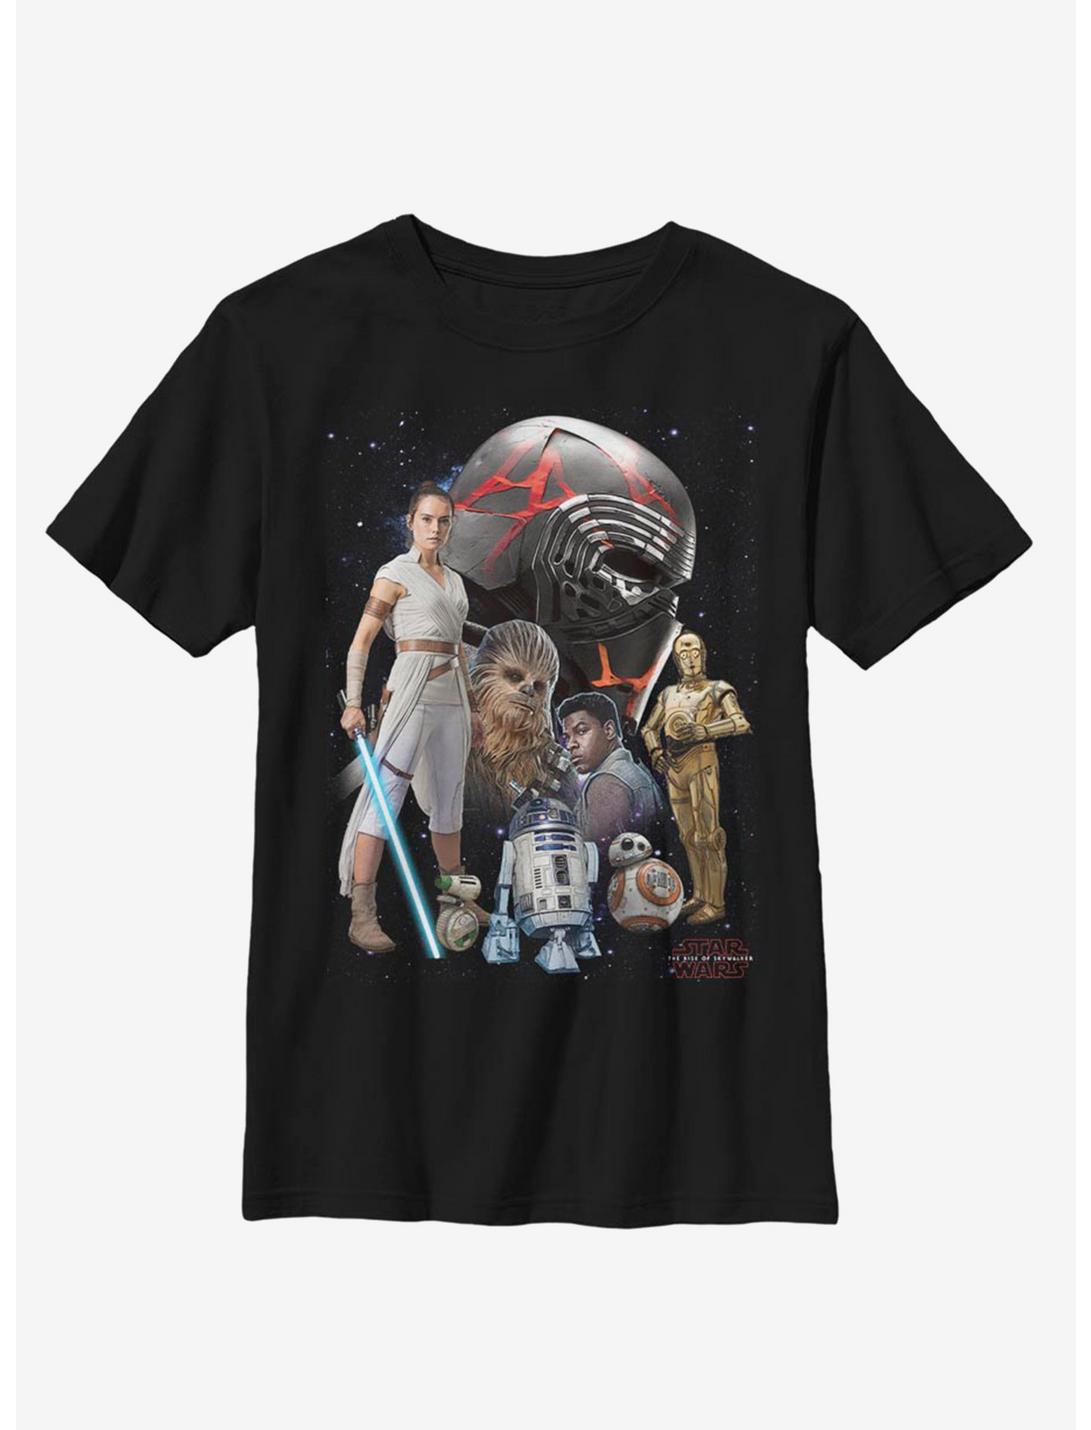 Star Wars Episode IX The Rise Of Skywalker Galaxy Heroes Youth T-Shirt, BLACK, hi-res